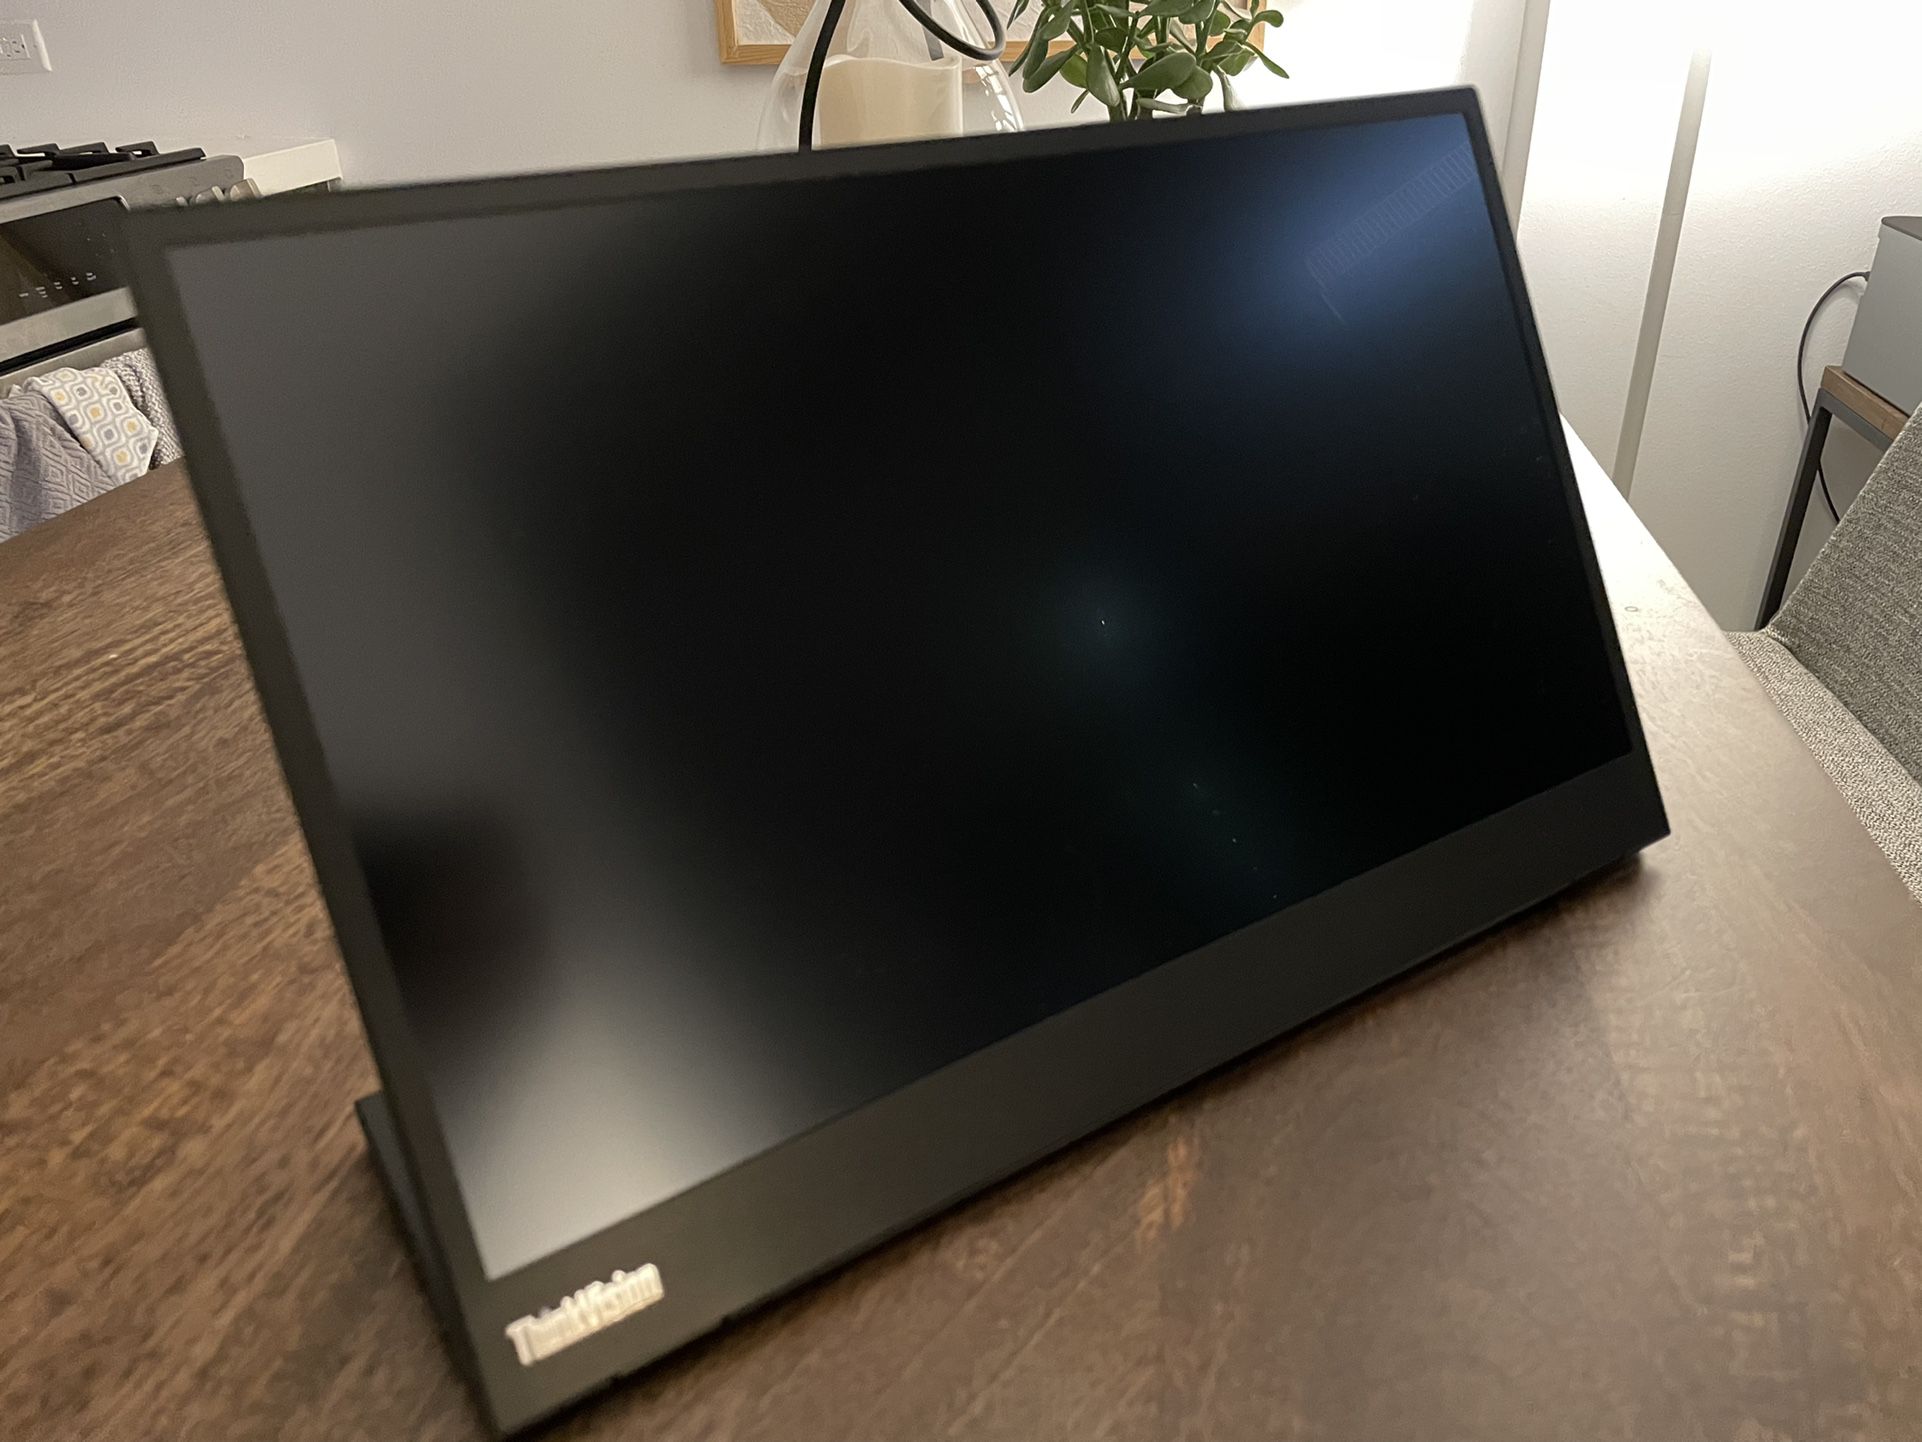 BRAND NEW Lenovo Thinkvision M14 Portable Monitor for Sale in New